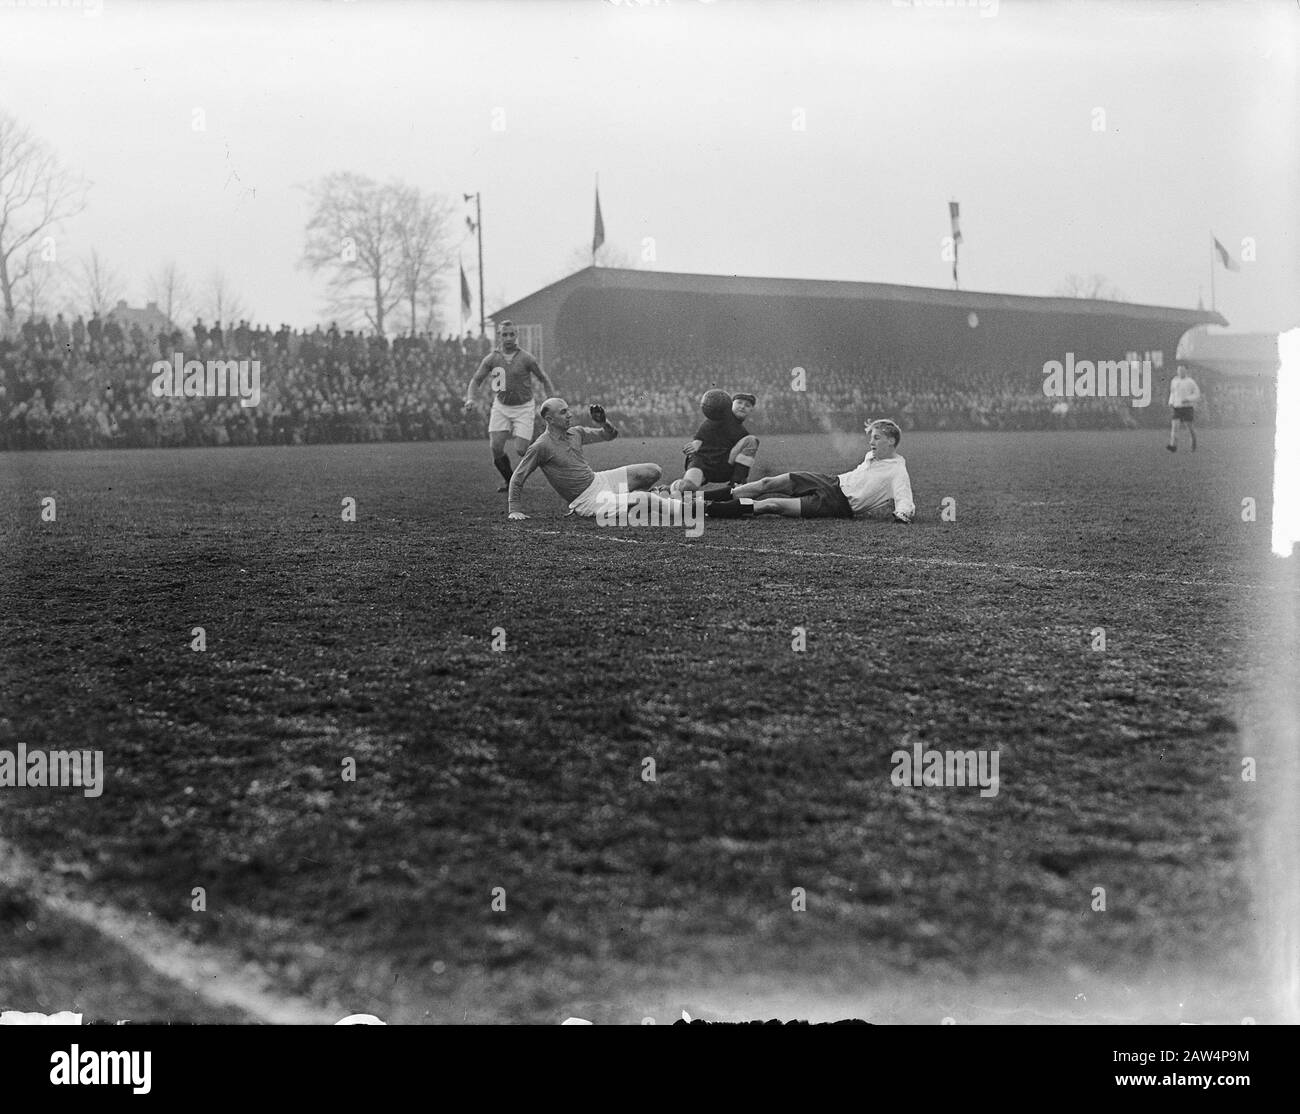 Oudi nter-nationals and HFC. Game Moment Date: January 1, 1950 Location: Haarlem Keywords: sport, football Stock Photo